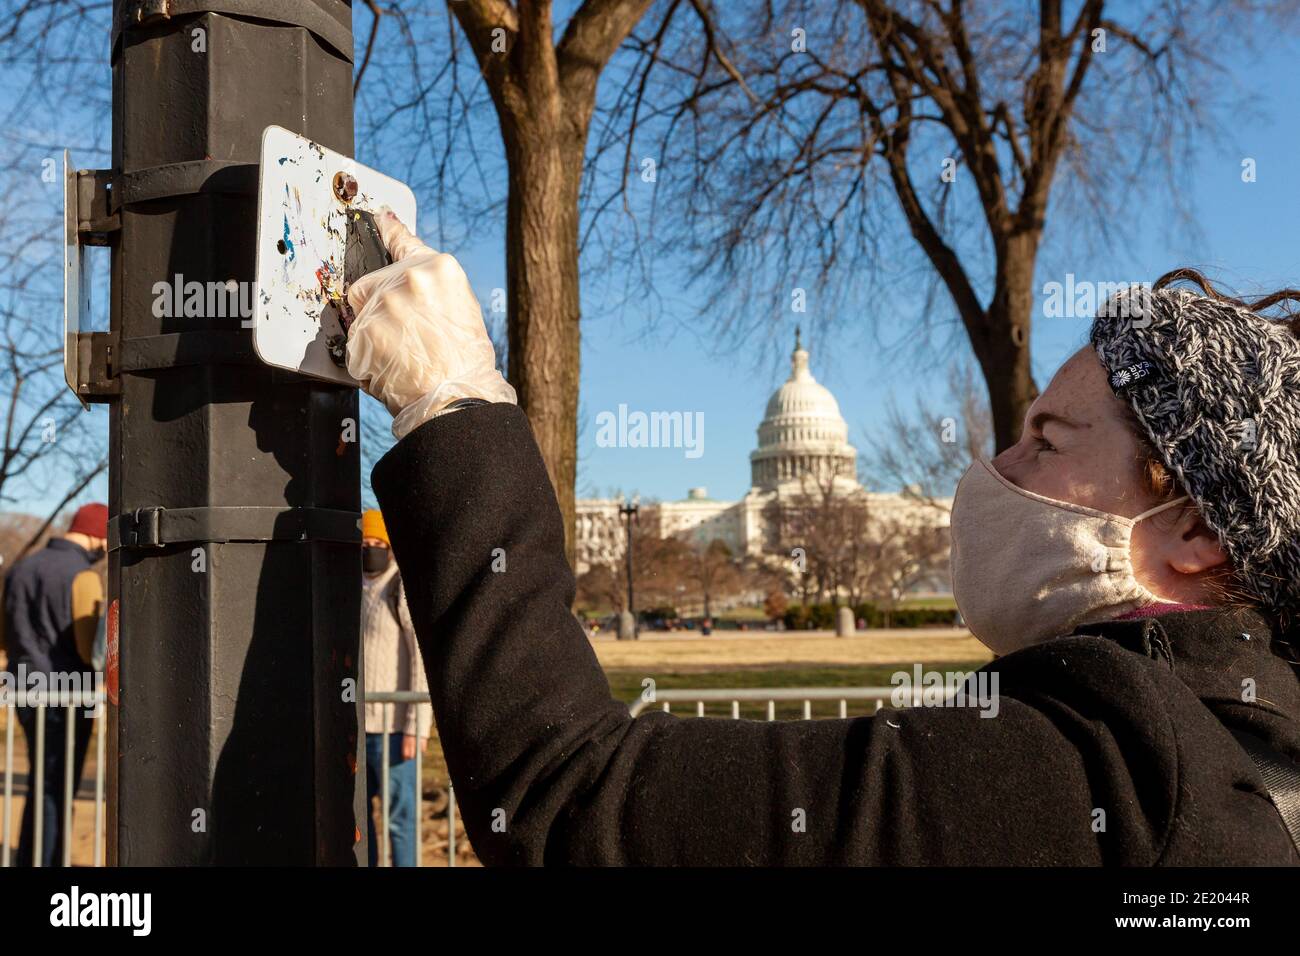 Washington, DC, USA, 10 January 2021.  Pictured:  A volunteer scrapes stickers stickers off a sign near the Capitol during Operation Clean Sweep. The event was an effort to clean up trash and propaganda left behind by fascists and Trump supporters following the January 6 Capitol insurrection. It was hosted by Continue to Serve, an anti-racist organization of military veterans.  Credit: Allison C Bailey/Alamy Live News Stock Photo